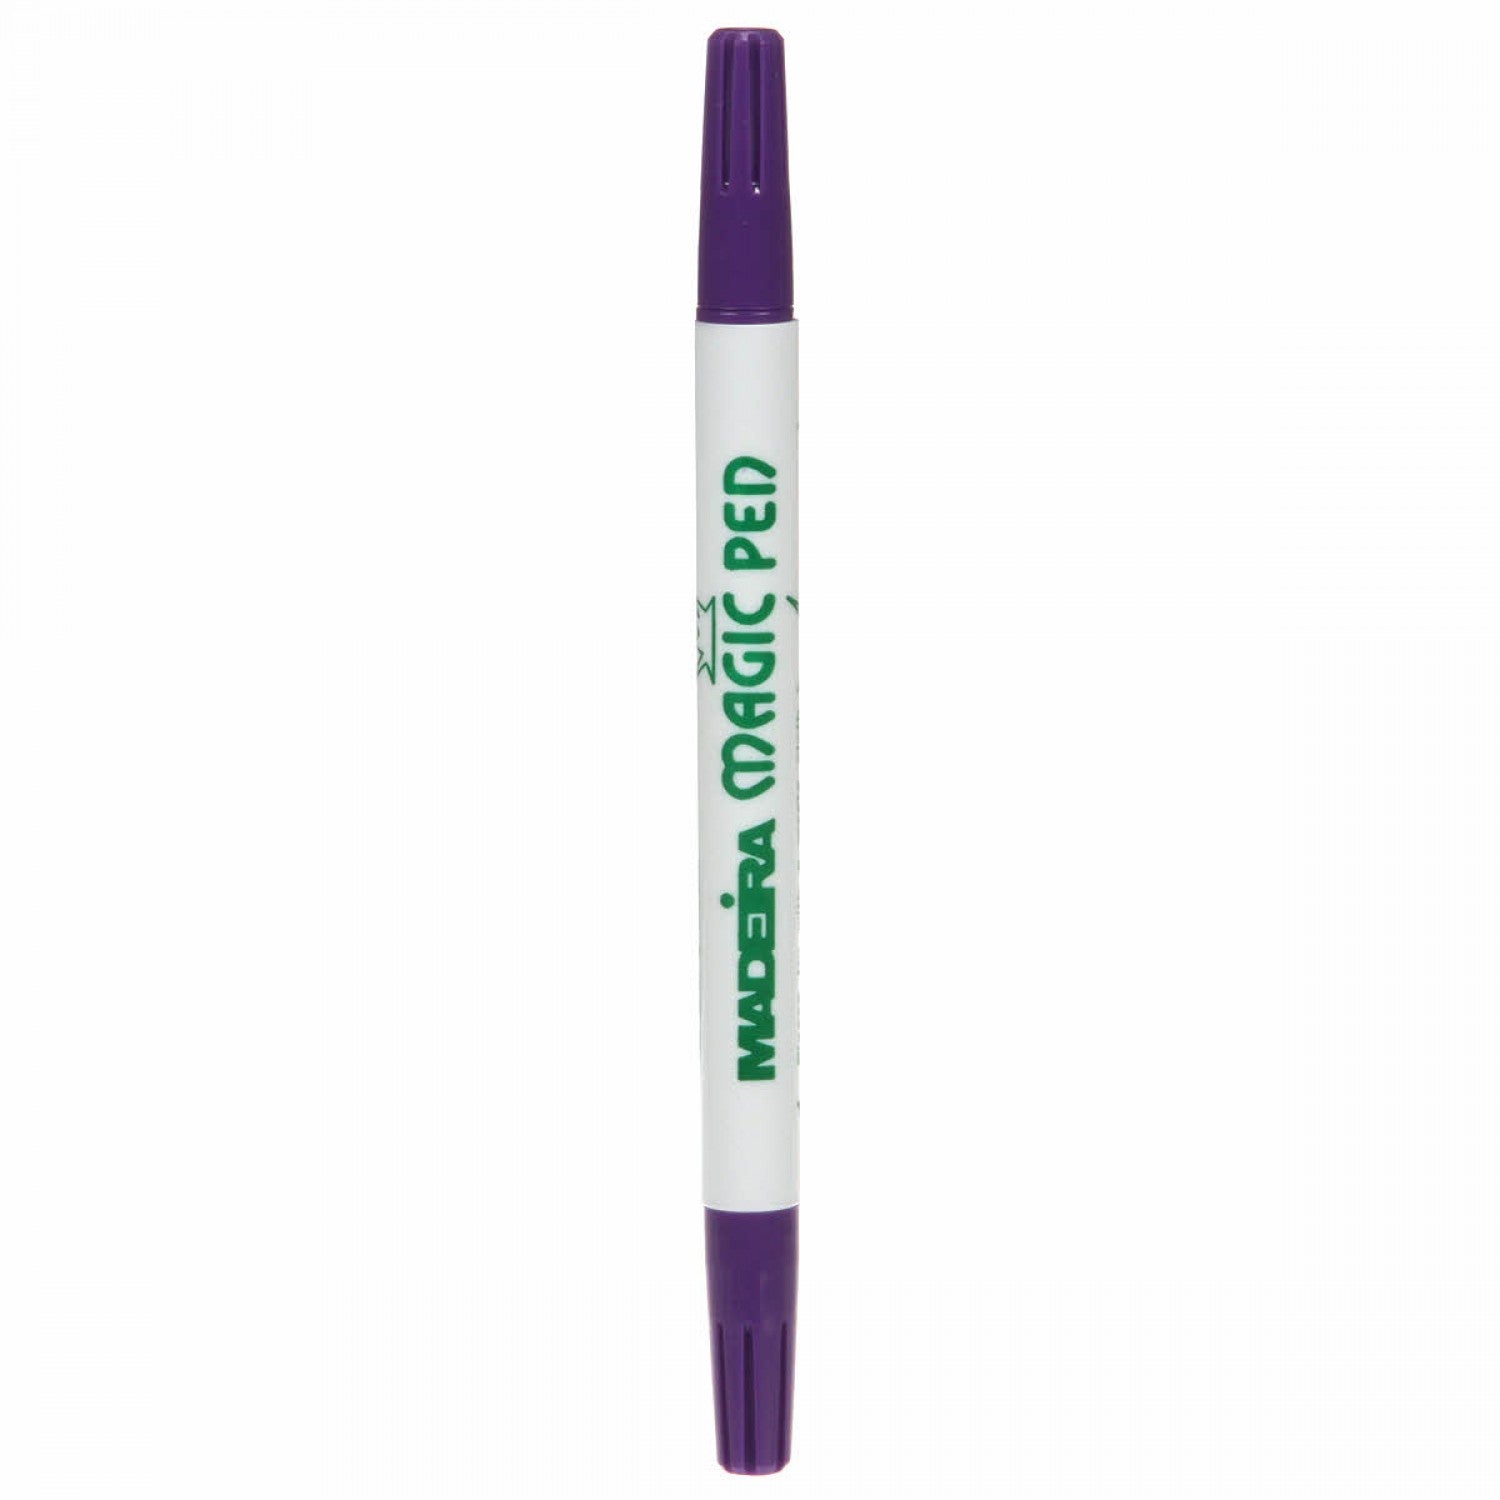 Madeira Magic Marker Disappearing Pen